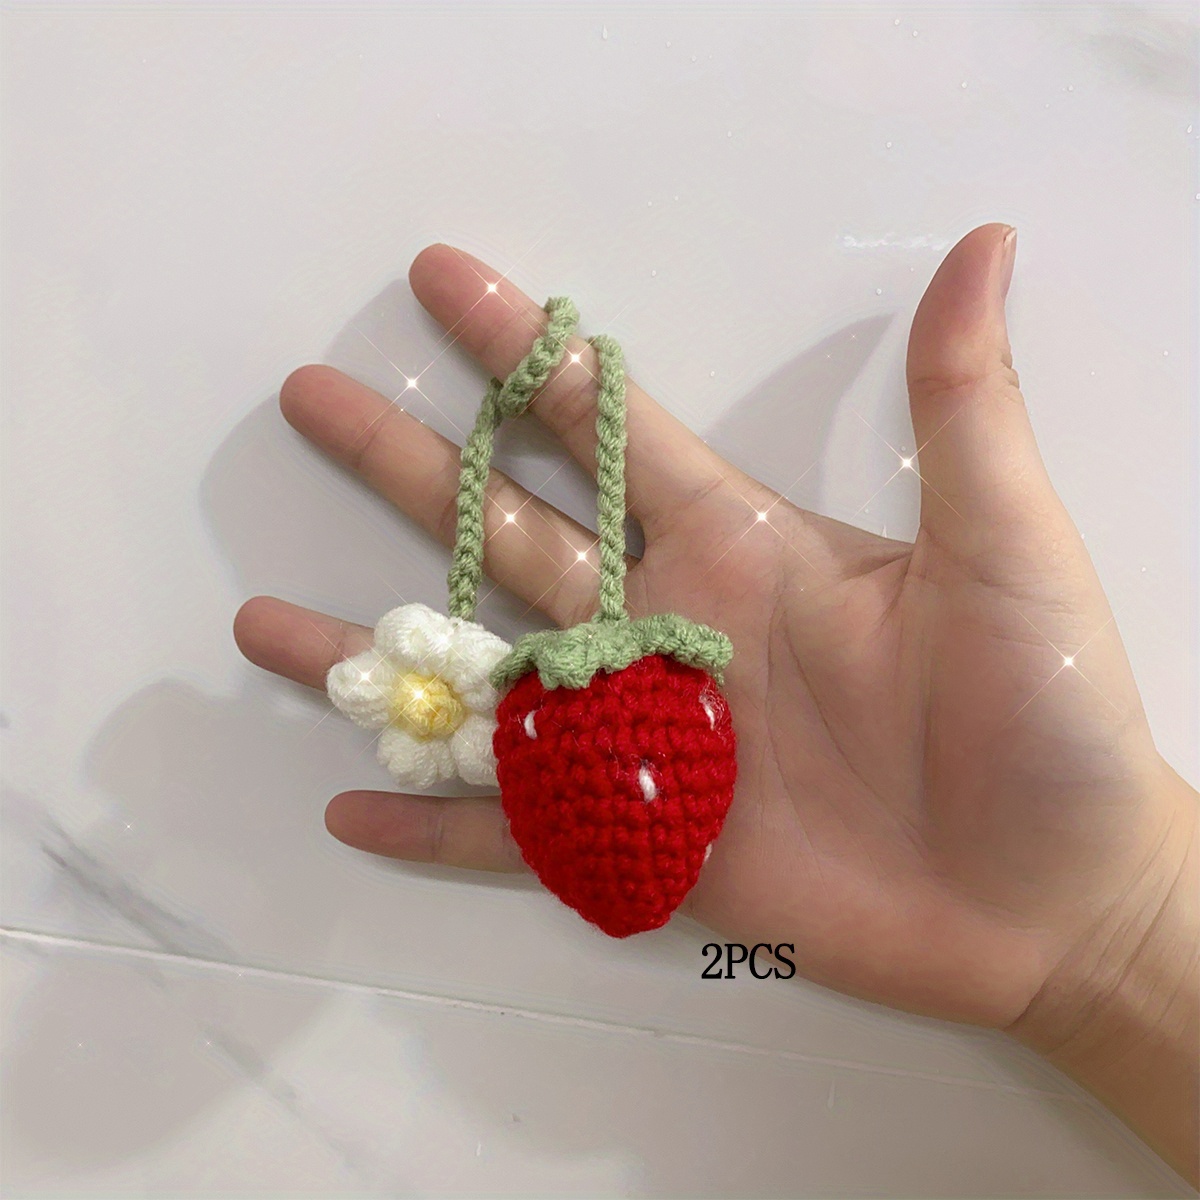 BOOFIRE Keychain Handmade,Hand Knitted Strawberry Bag Ornament,Backpack Ornaments for Girls,gift for Her Kids Birthday Graduation (1pcs)